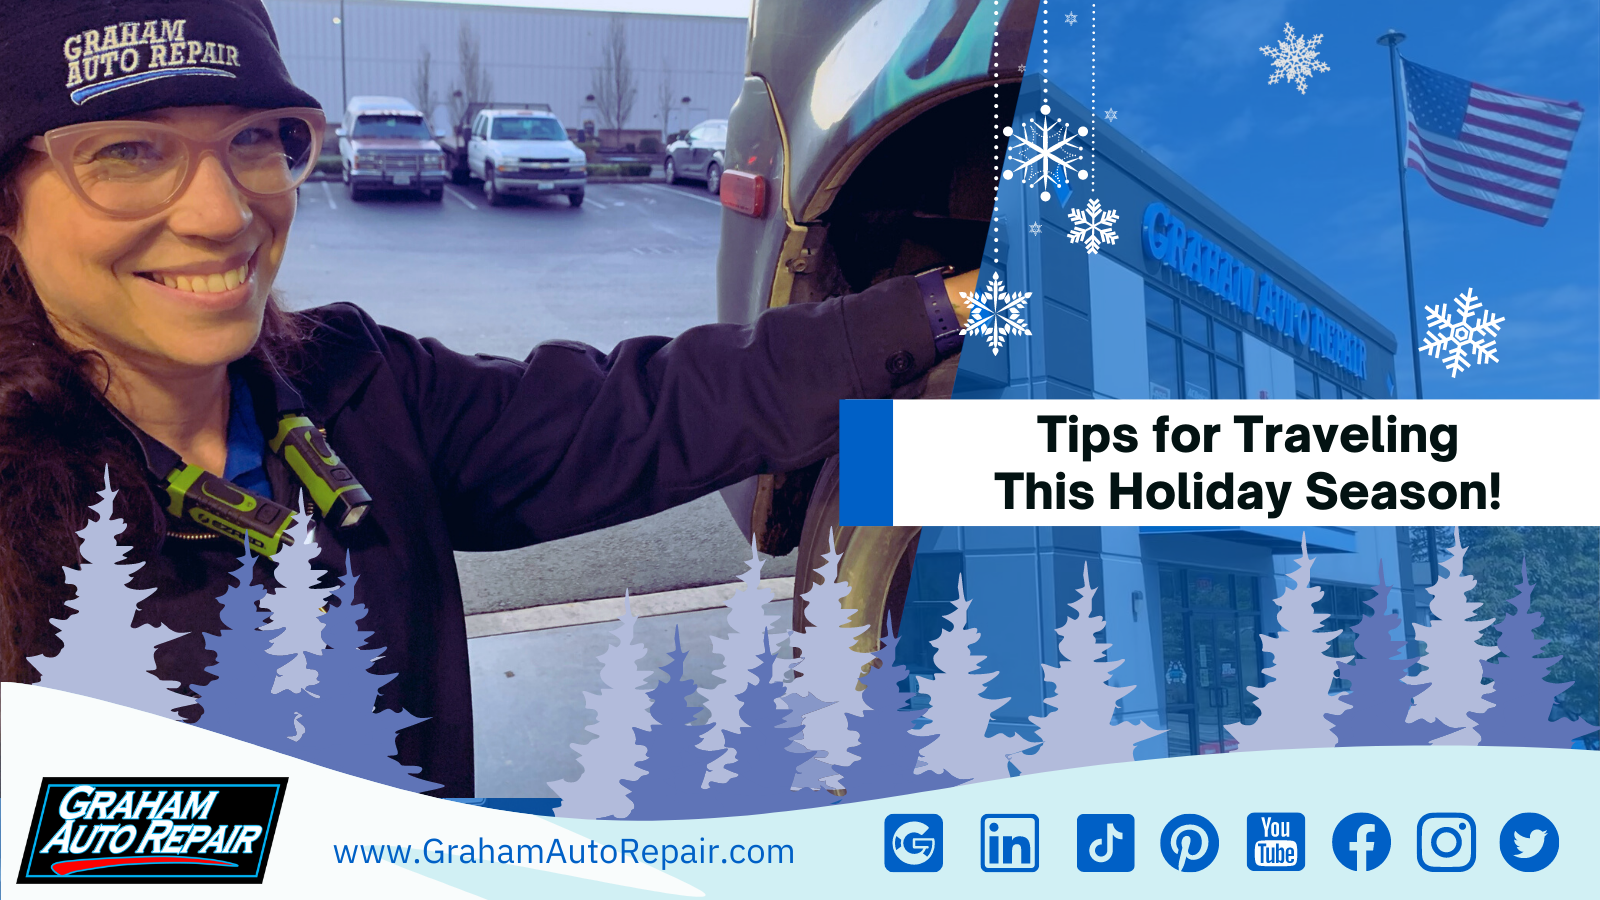 Tips from Graham Auto Repair for Traveling this Winter Holiday Season